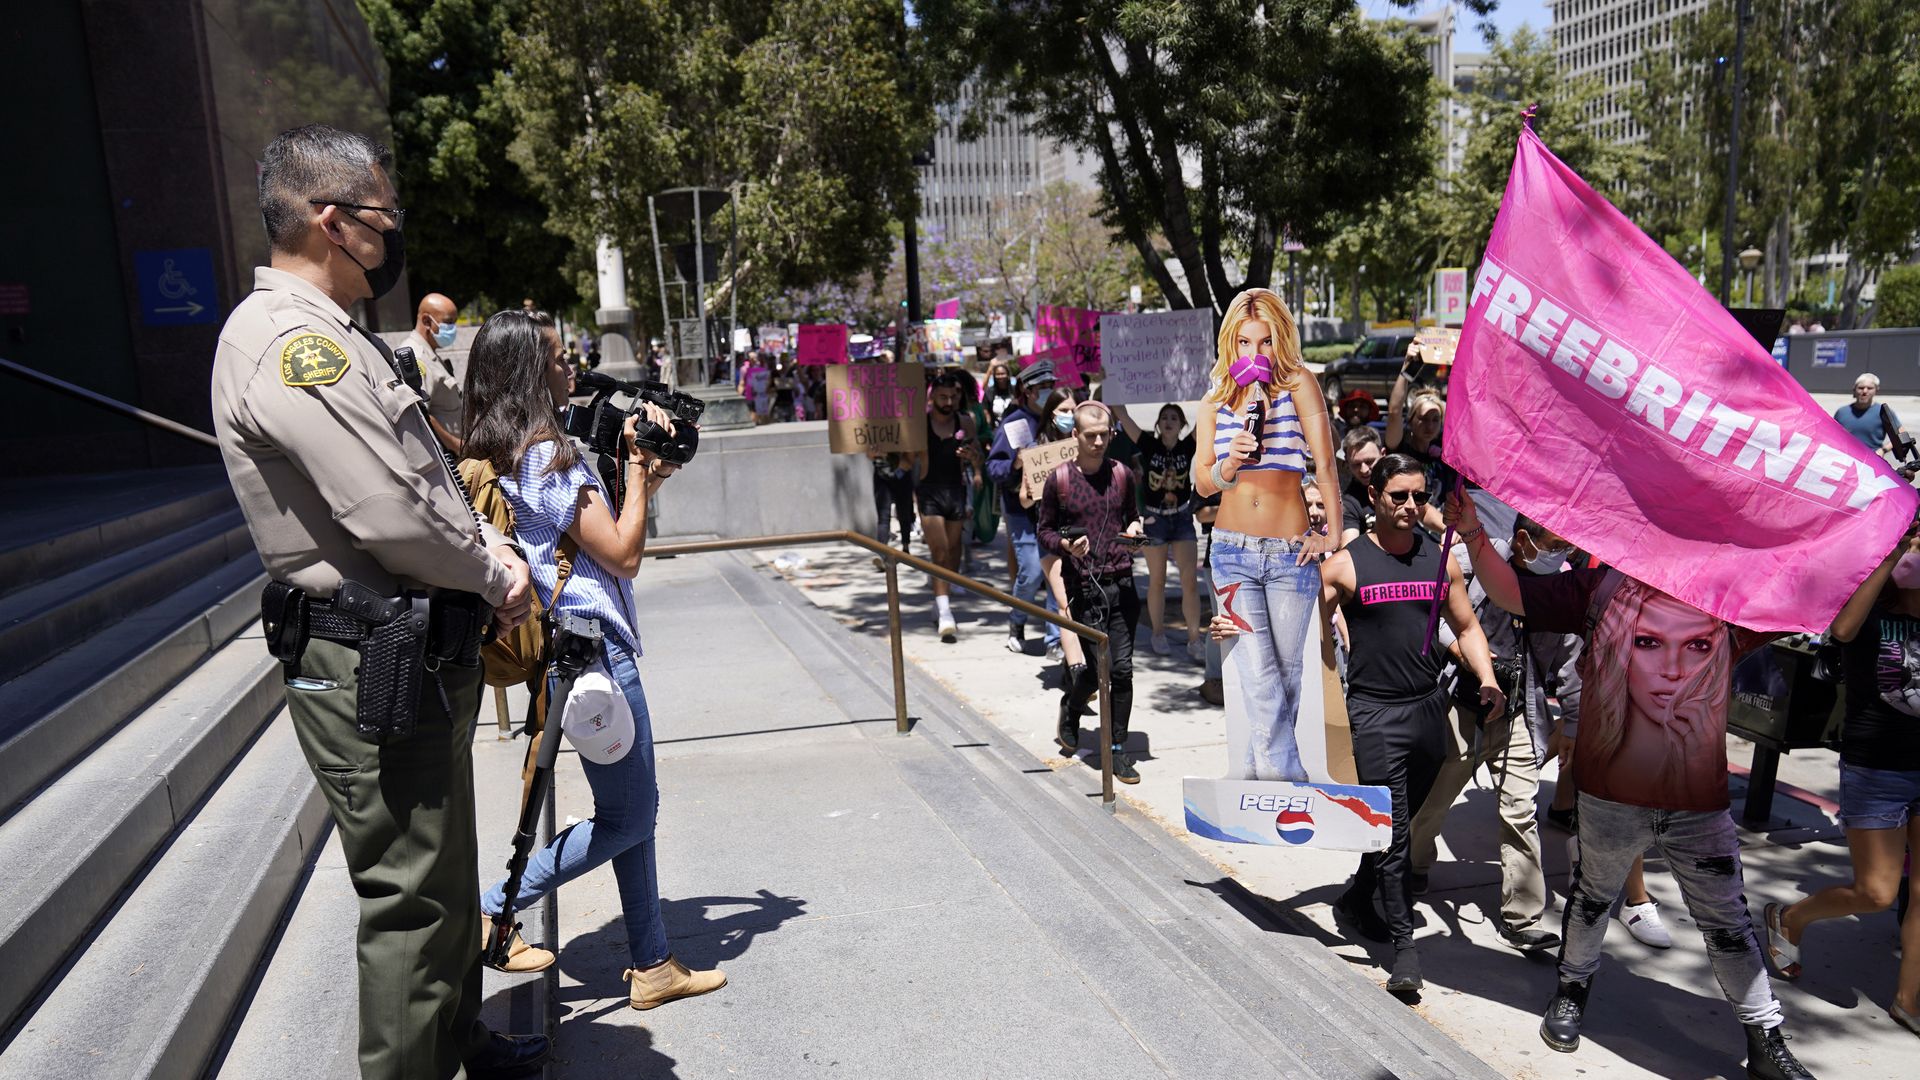 Free Britney protest outside courtroom